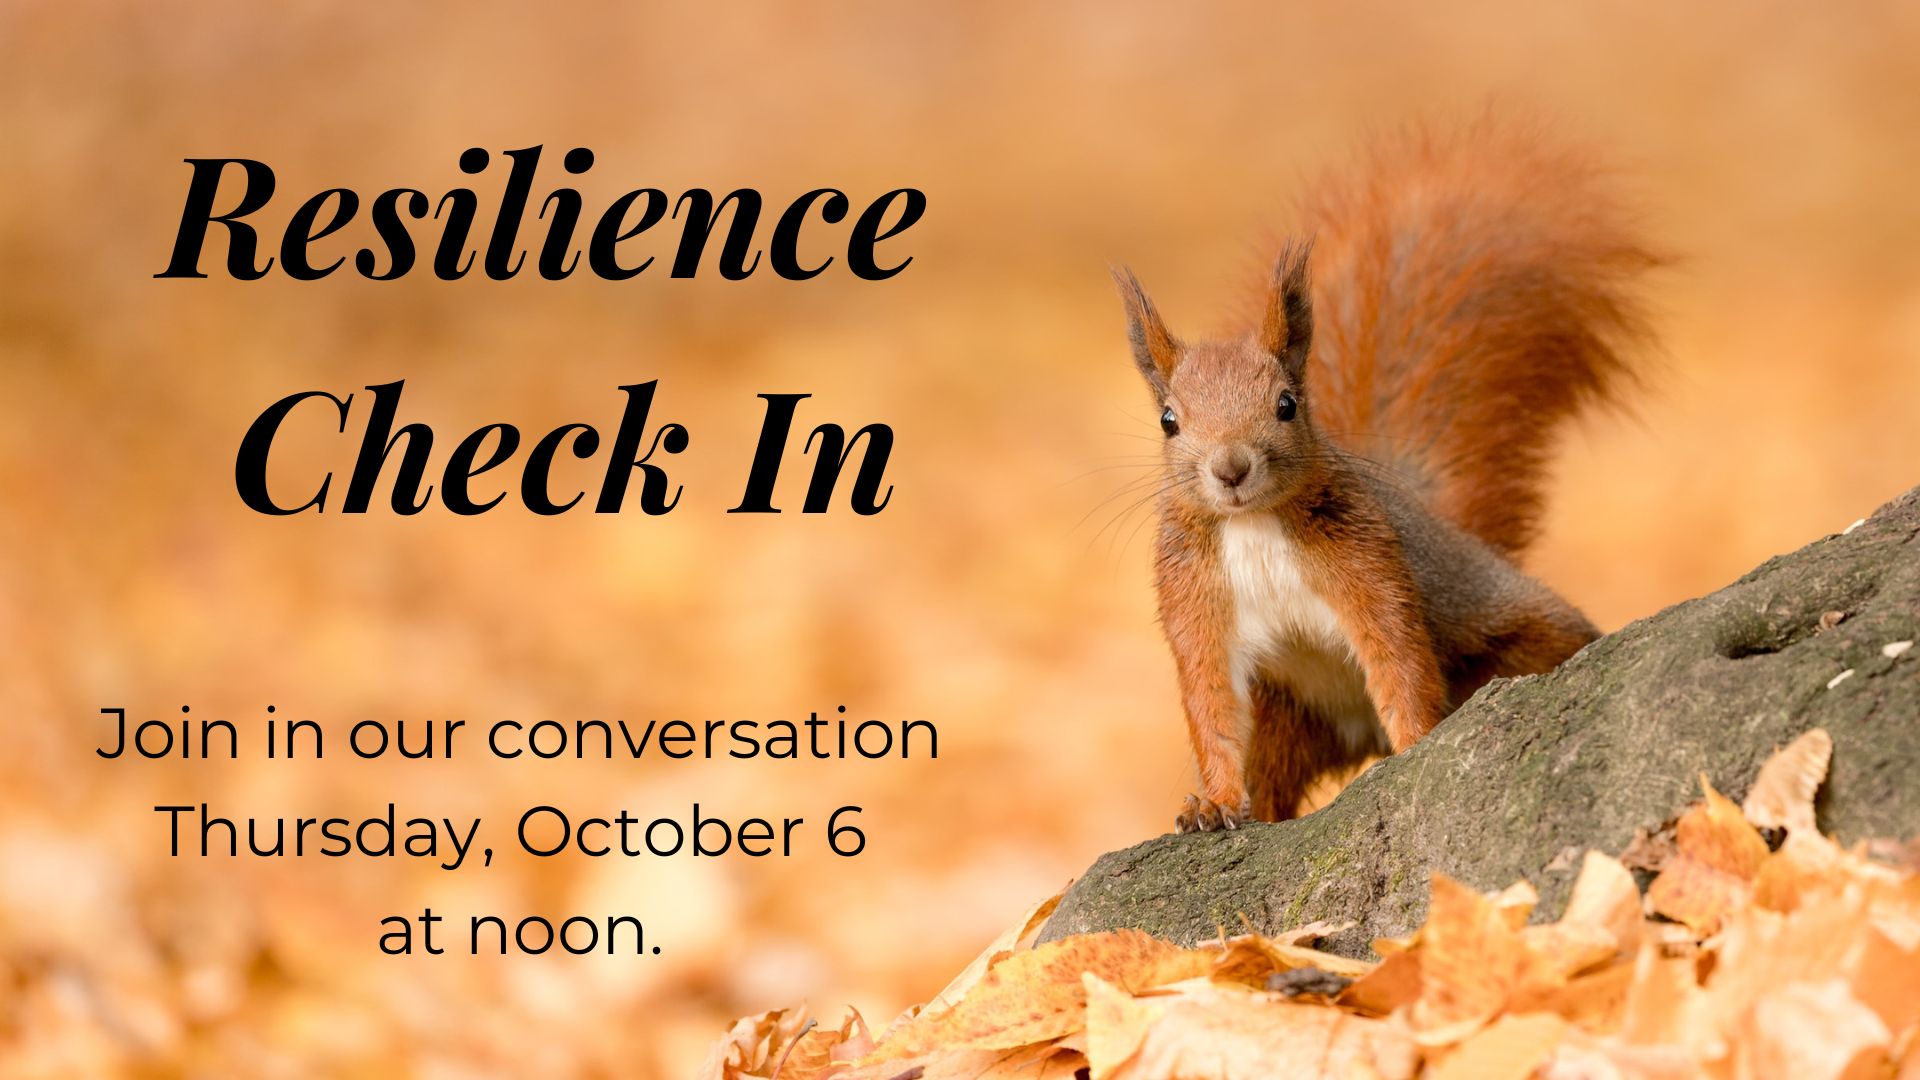 Poster advertising "Resilience Check In" Thursday, October 6 at noon EST.